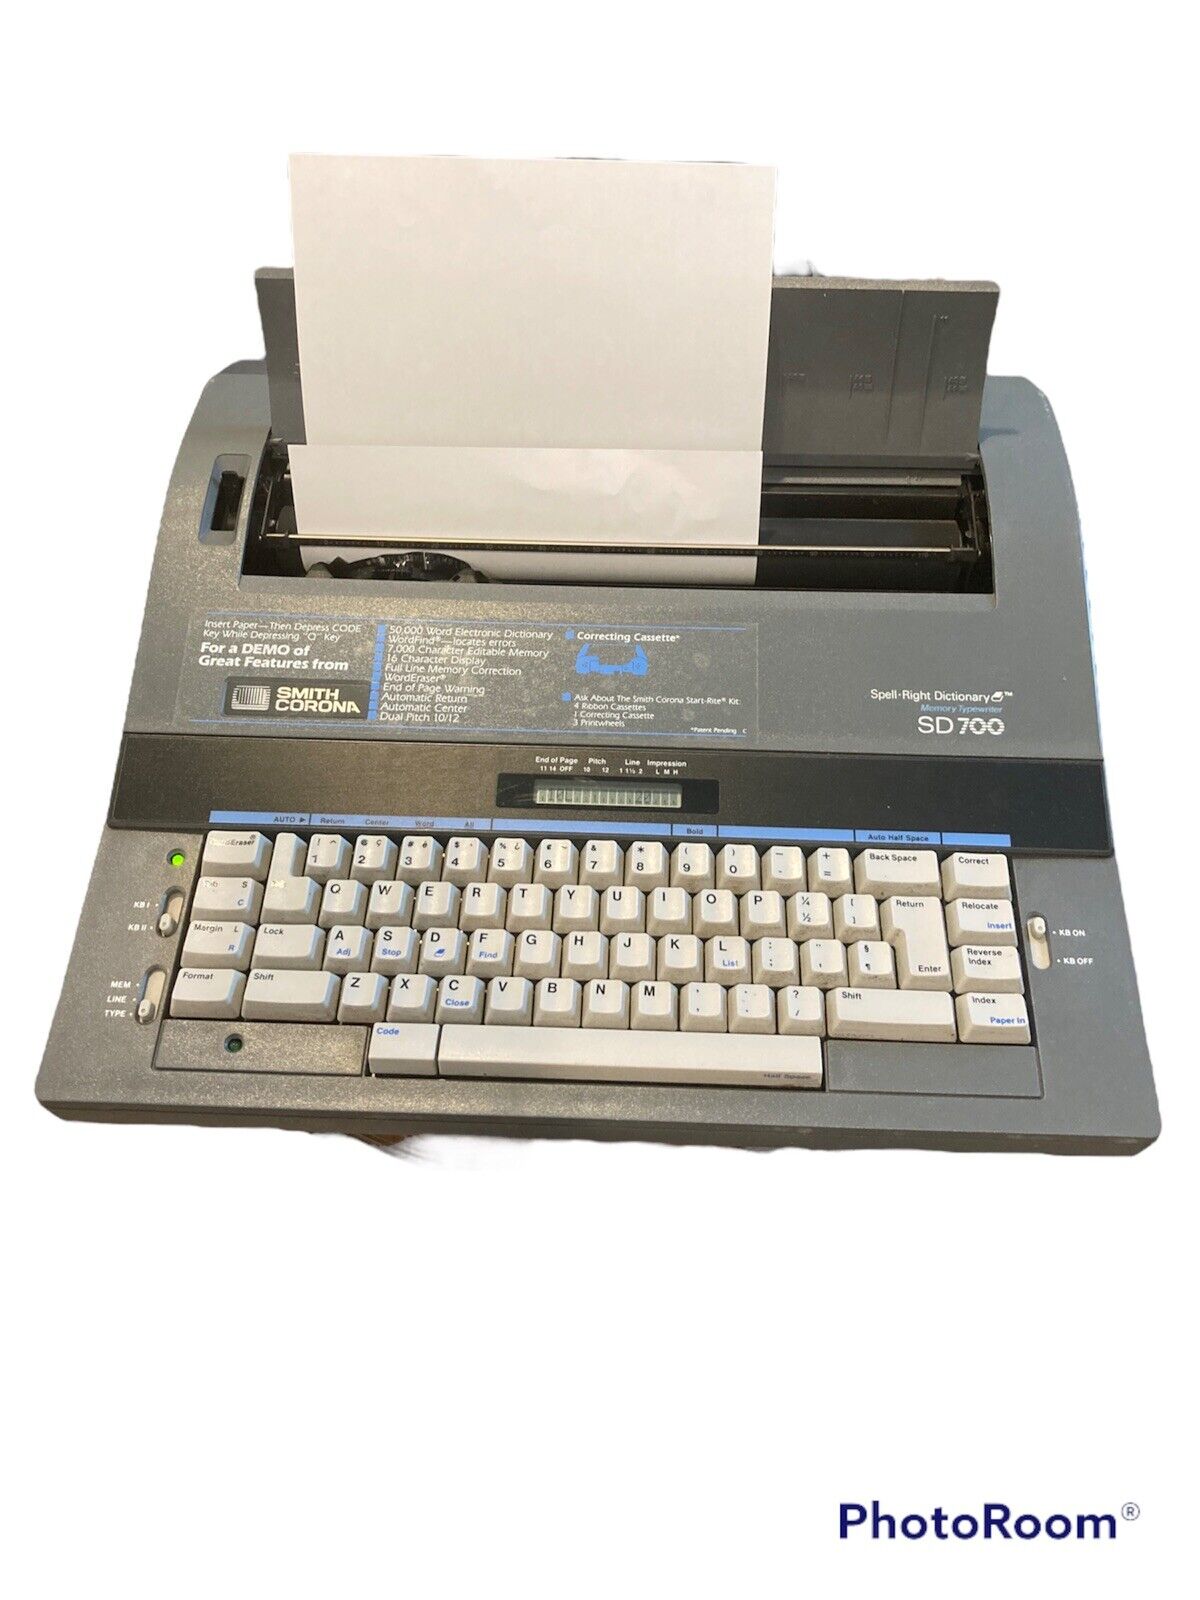 Smith Corona SD700 Spell Right Dictionary Portable Electric Typewriter  Tested